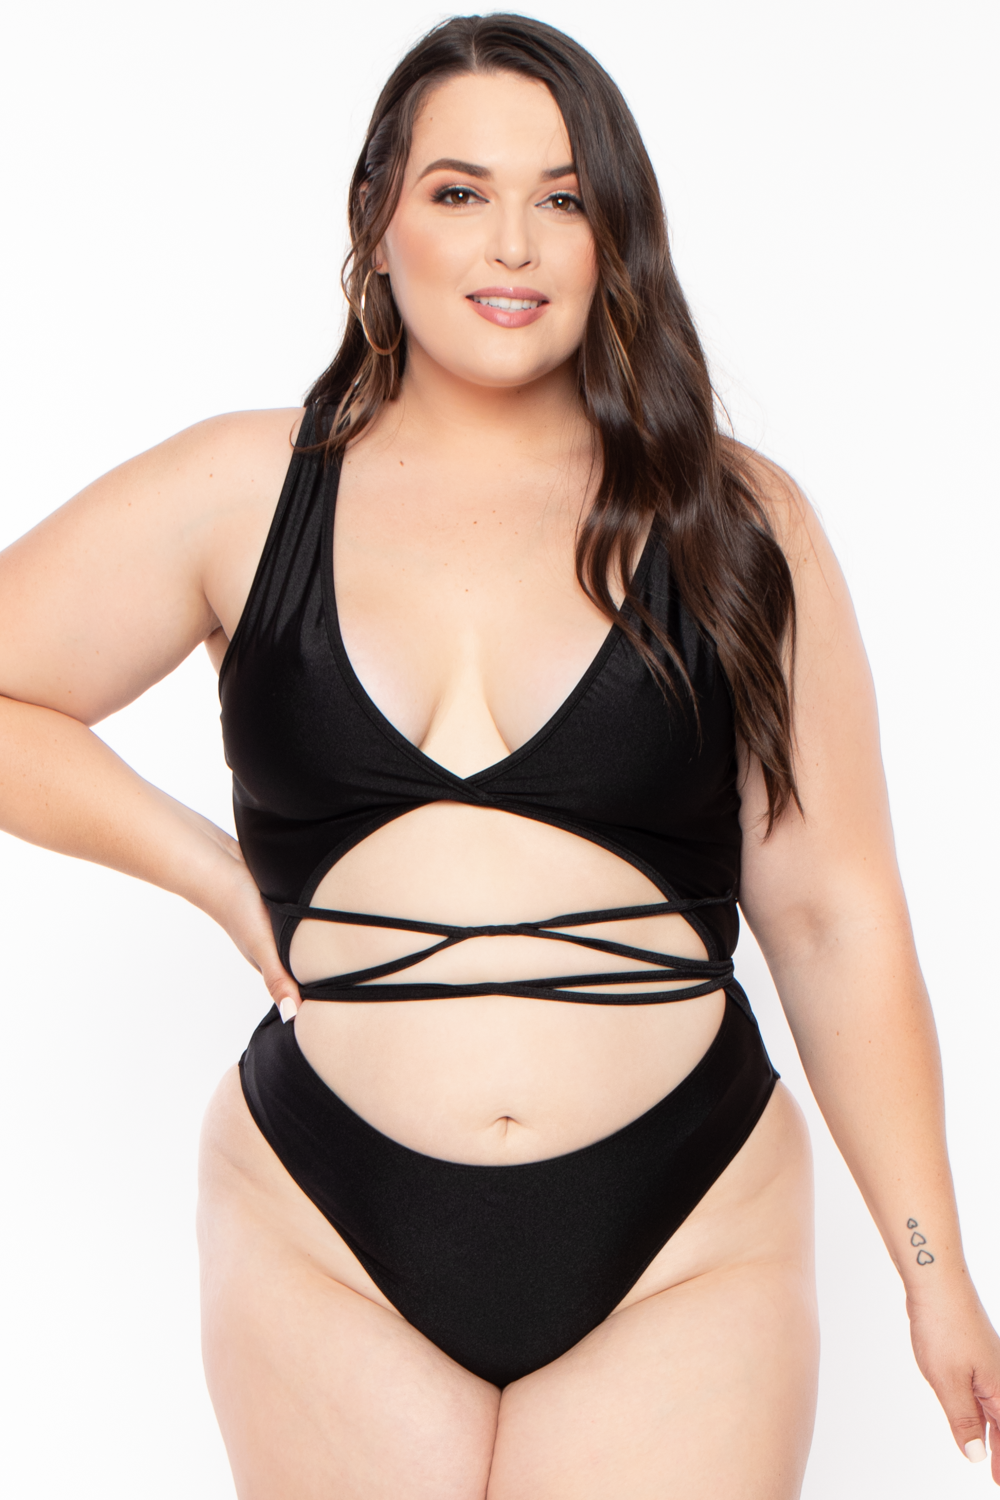 Plus Size Bathing Suits - How To Buy The Perfect One - Curvysea